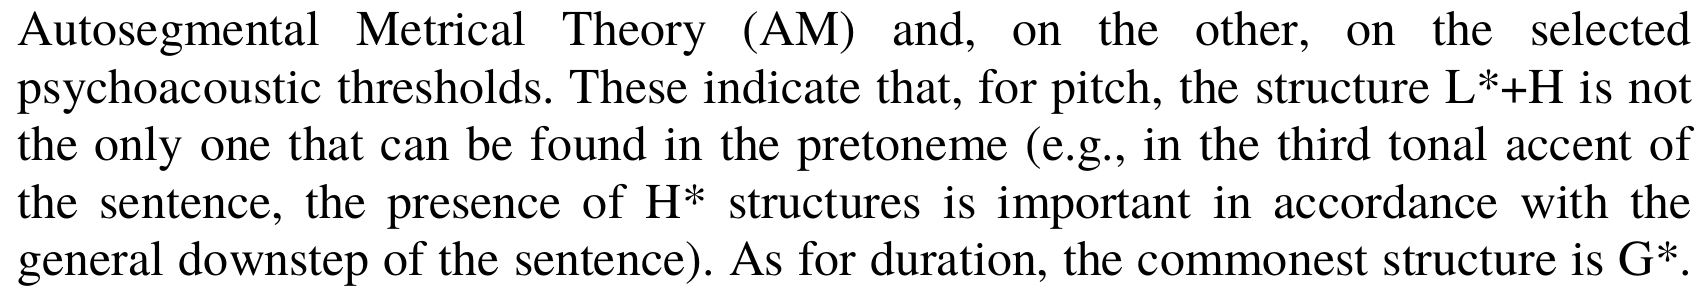 A couple of lines from an academic paper where compound tones appear
 as part of sentences. The text uses the standard typesetting of ToBI tones,
 which does not blend into the surrounding text